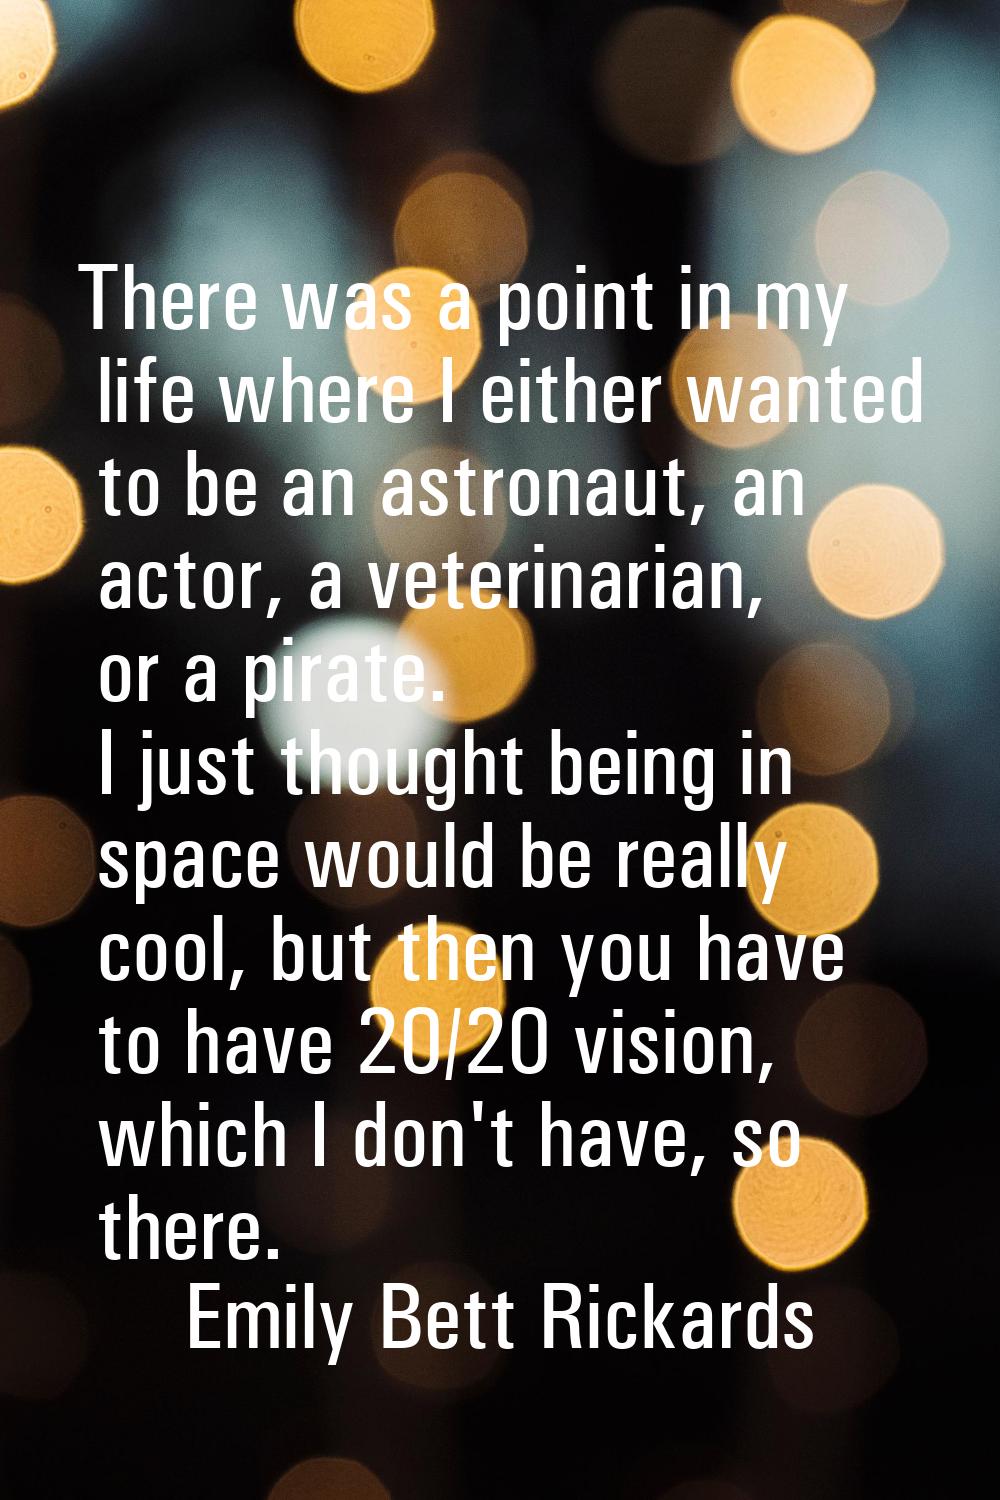 There was a point in my life where I either wanted to be an astronaut, an actor, a veterinarian, or